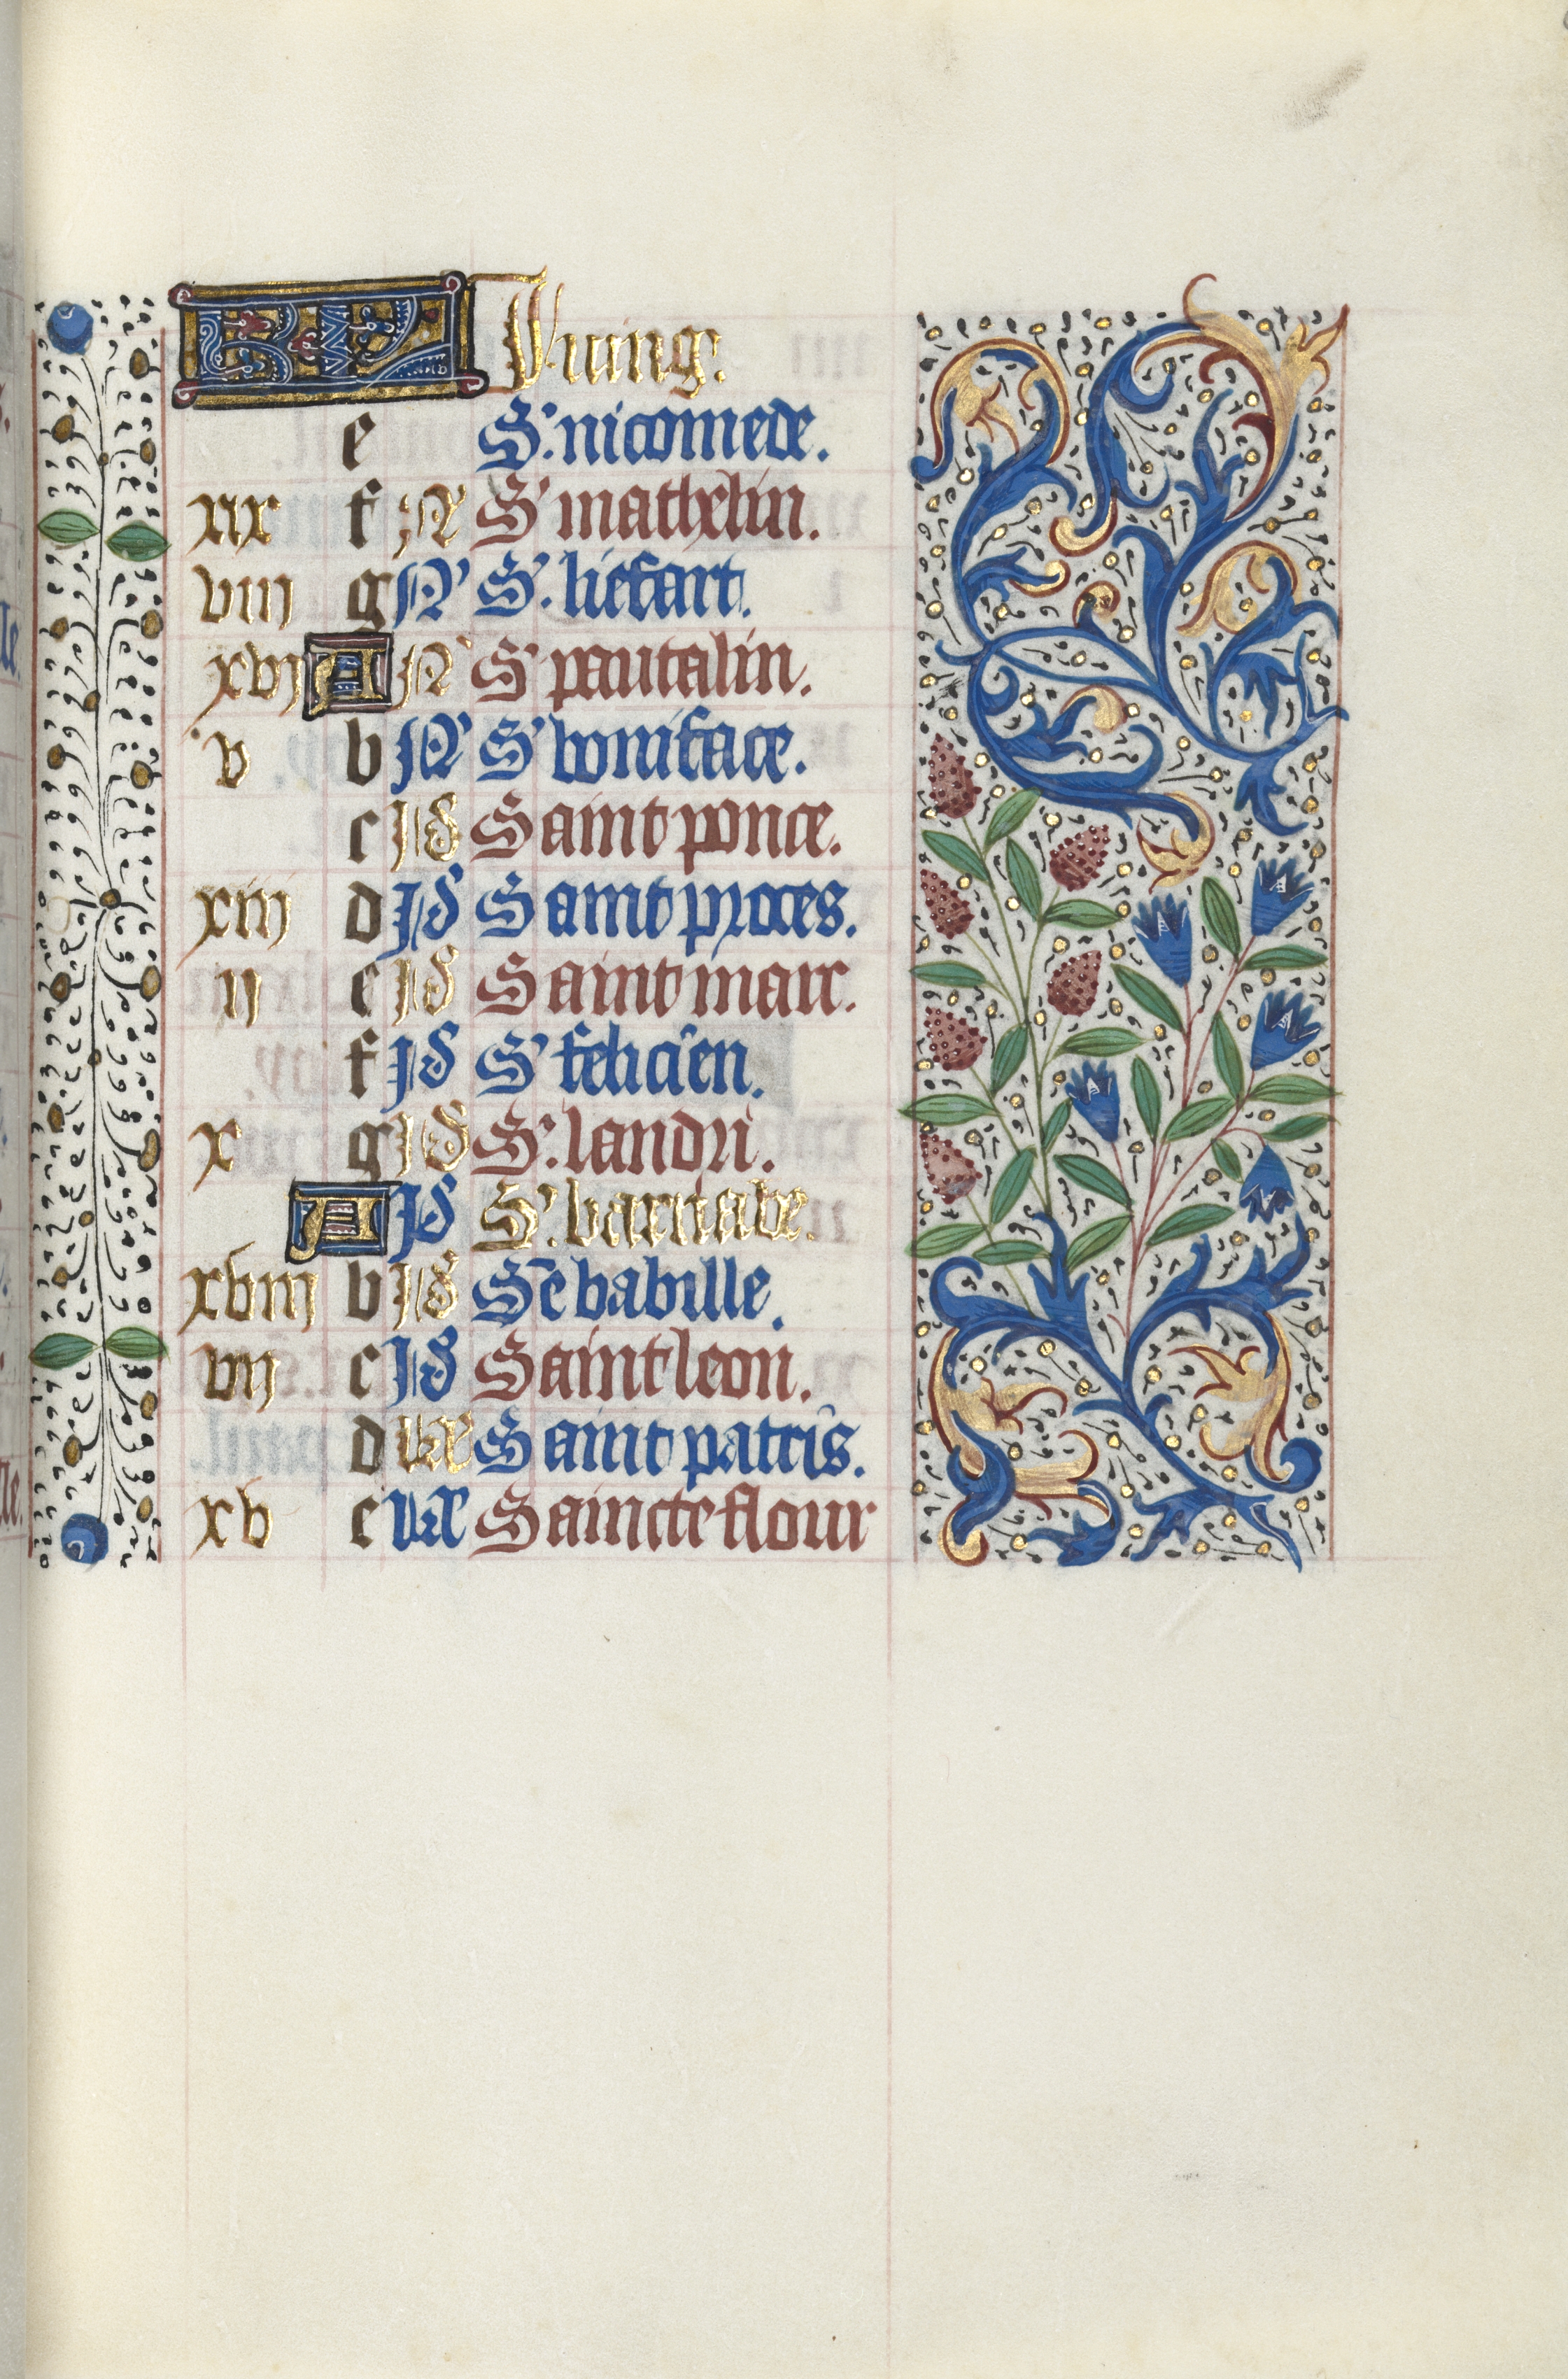 Book of Hours (Use of Rouen): fol. 51r, Calendar Page for June